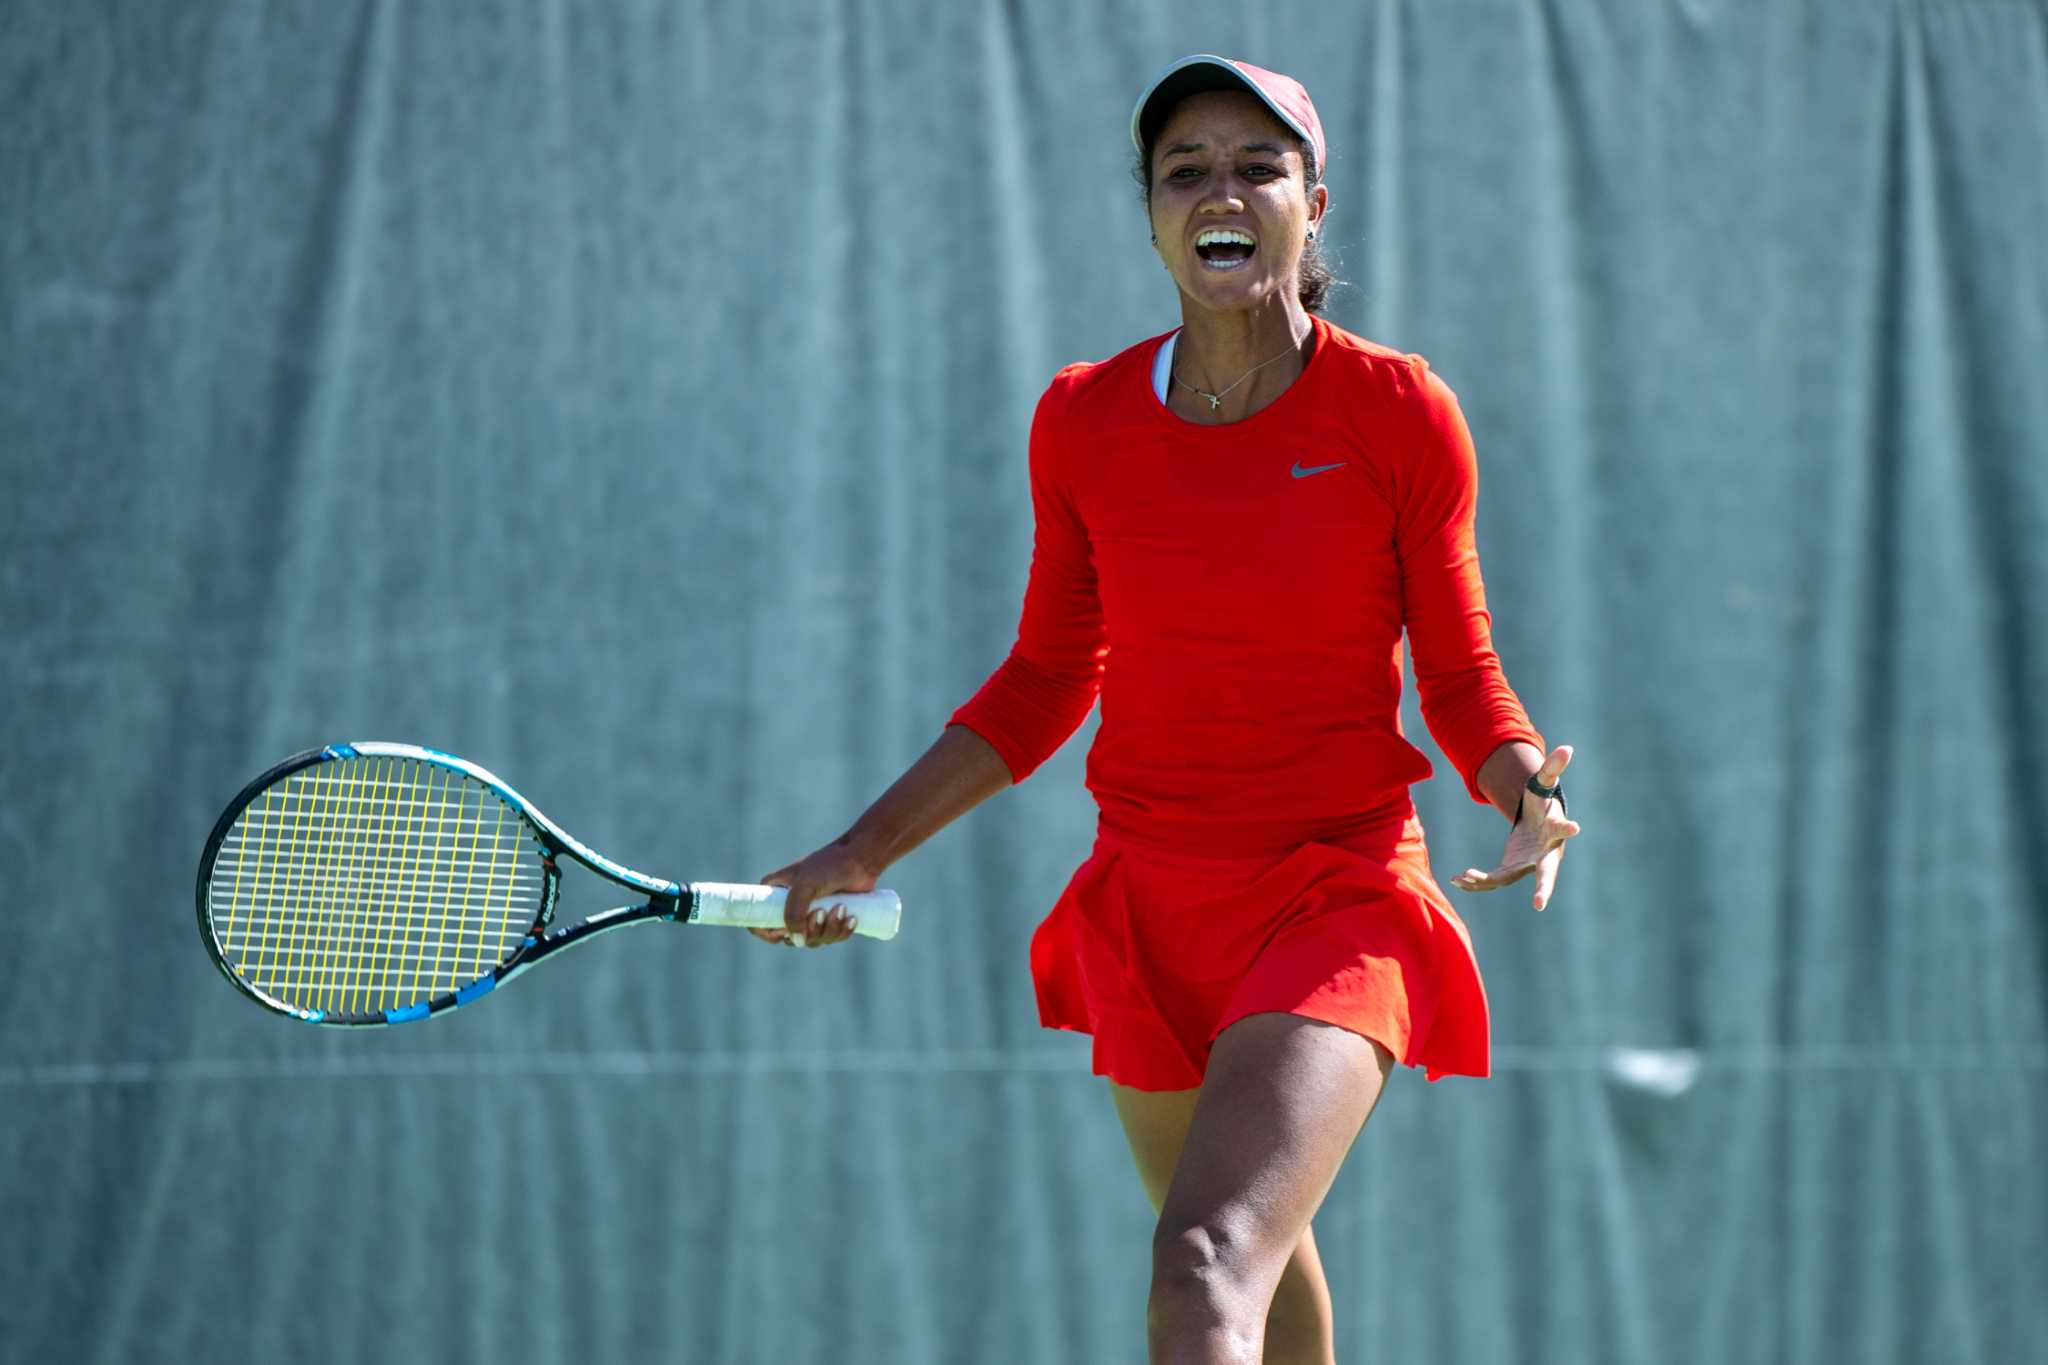 Stanford women’s tennis regains footing after pandemic disruptions